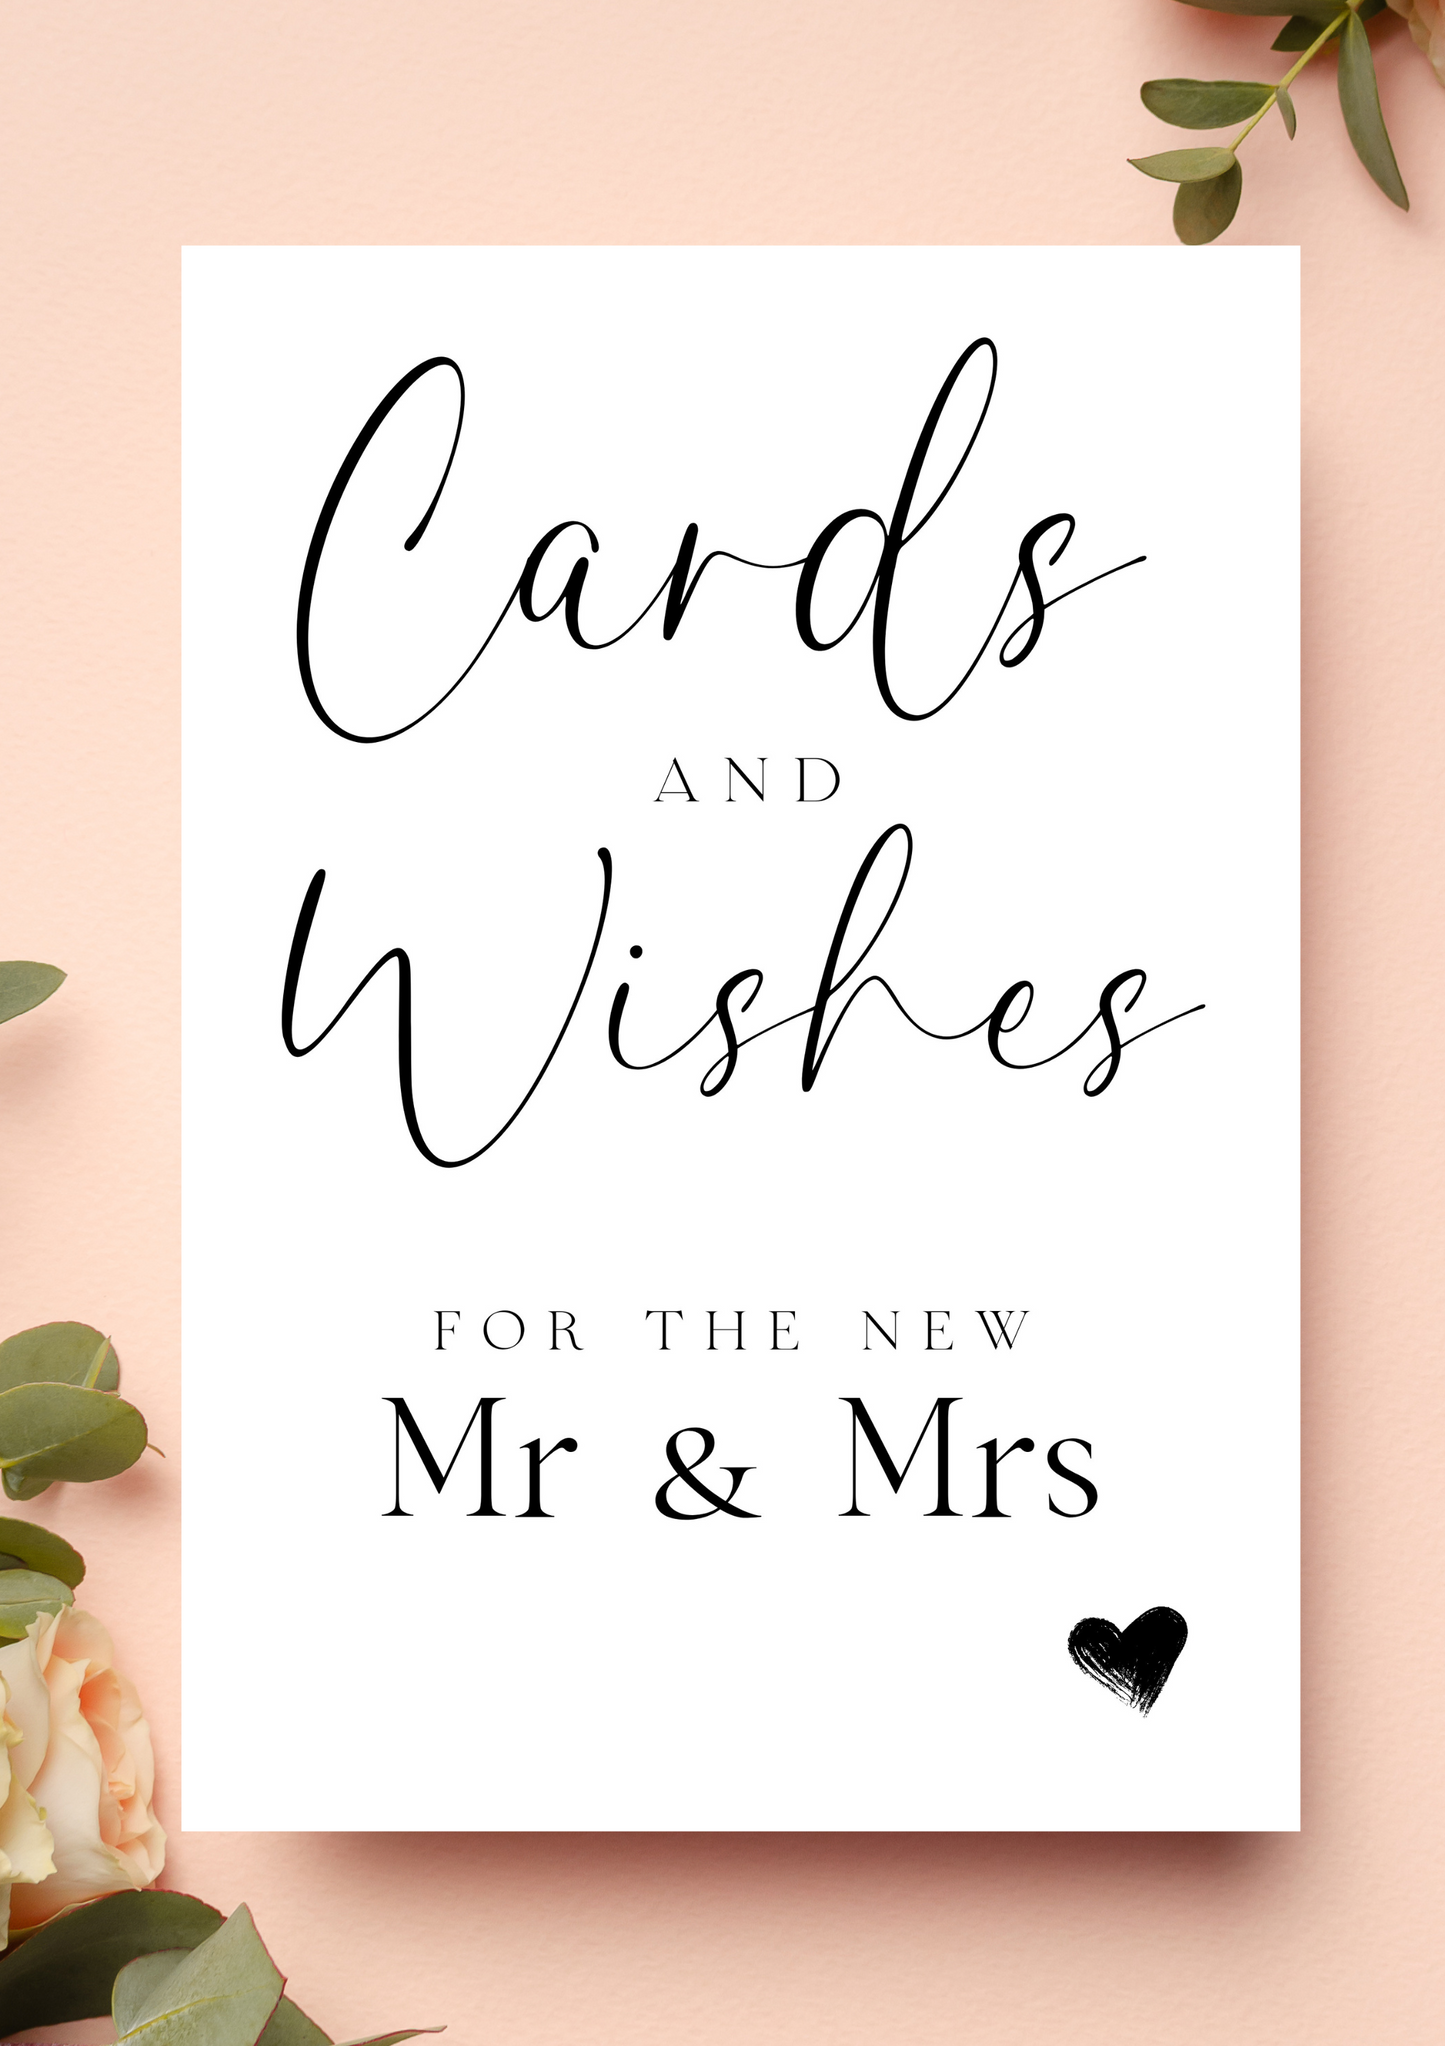 Lucy black - Cards & wishes Mr & Mrs sign